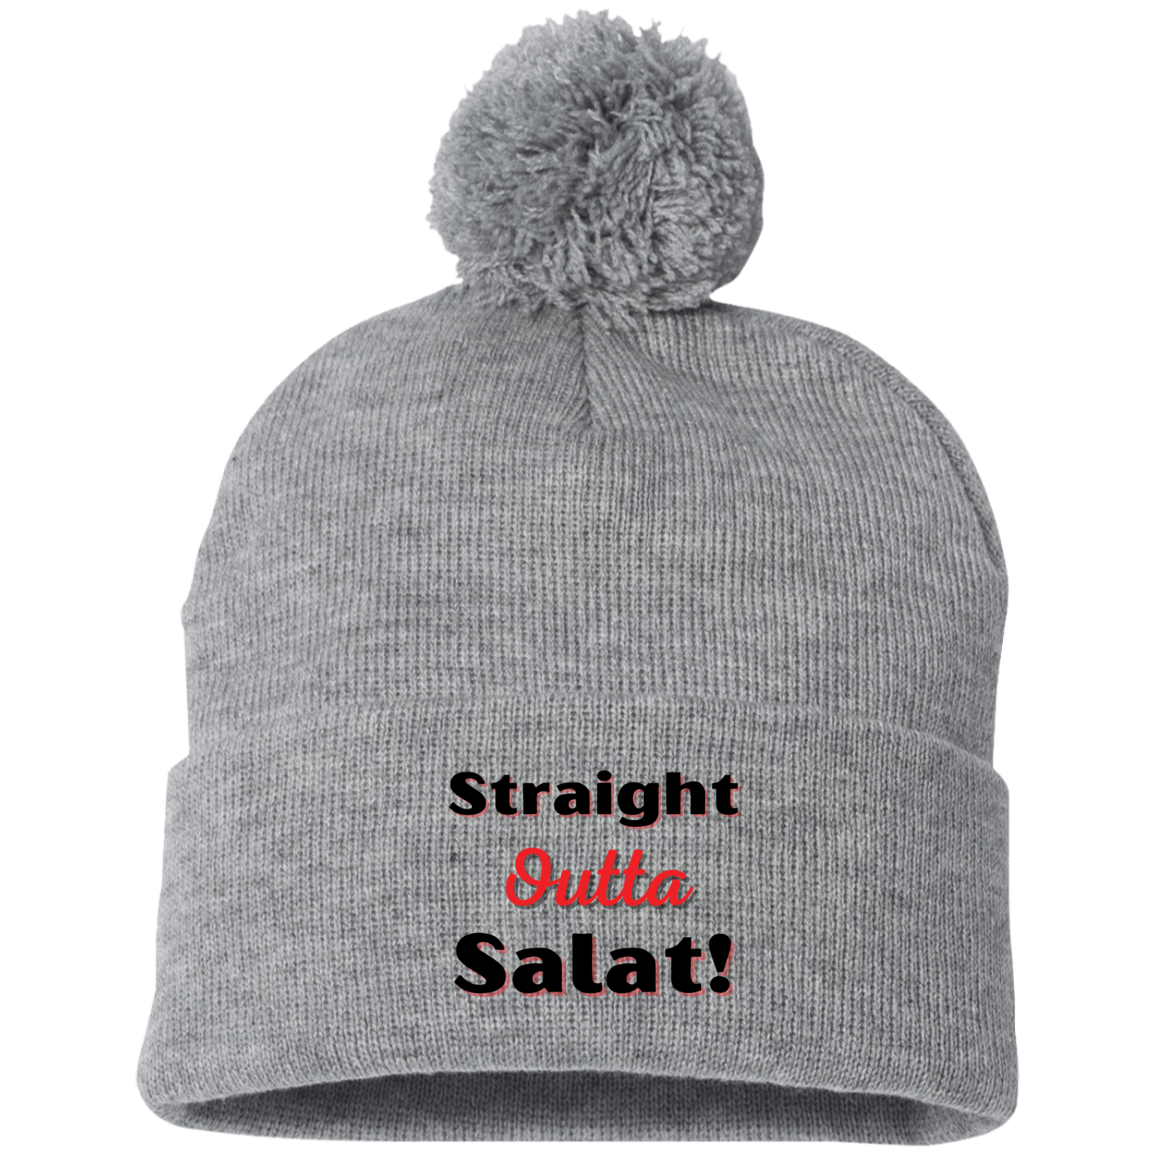 STRAIGHT OUTTA SALAT! Embroidered Pom Pom Knit Cap (MORE COLOR OPTIONS)